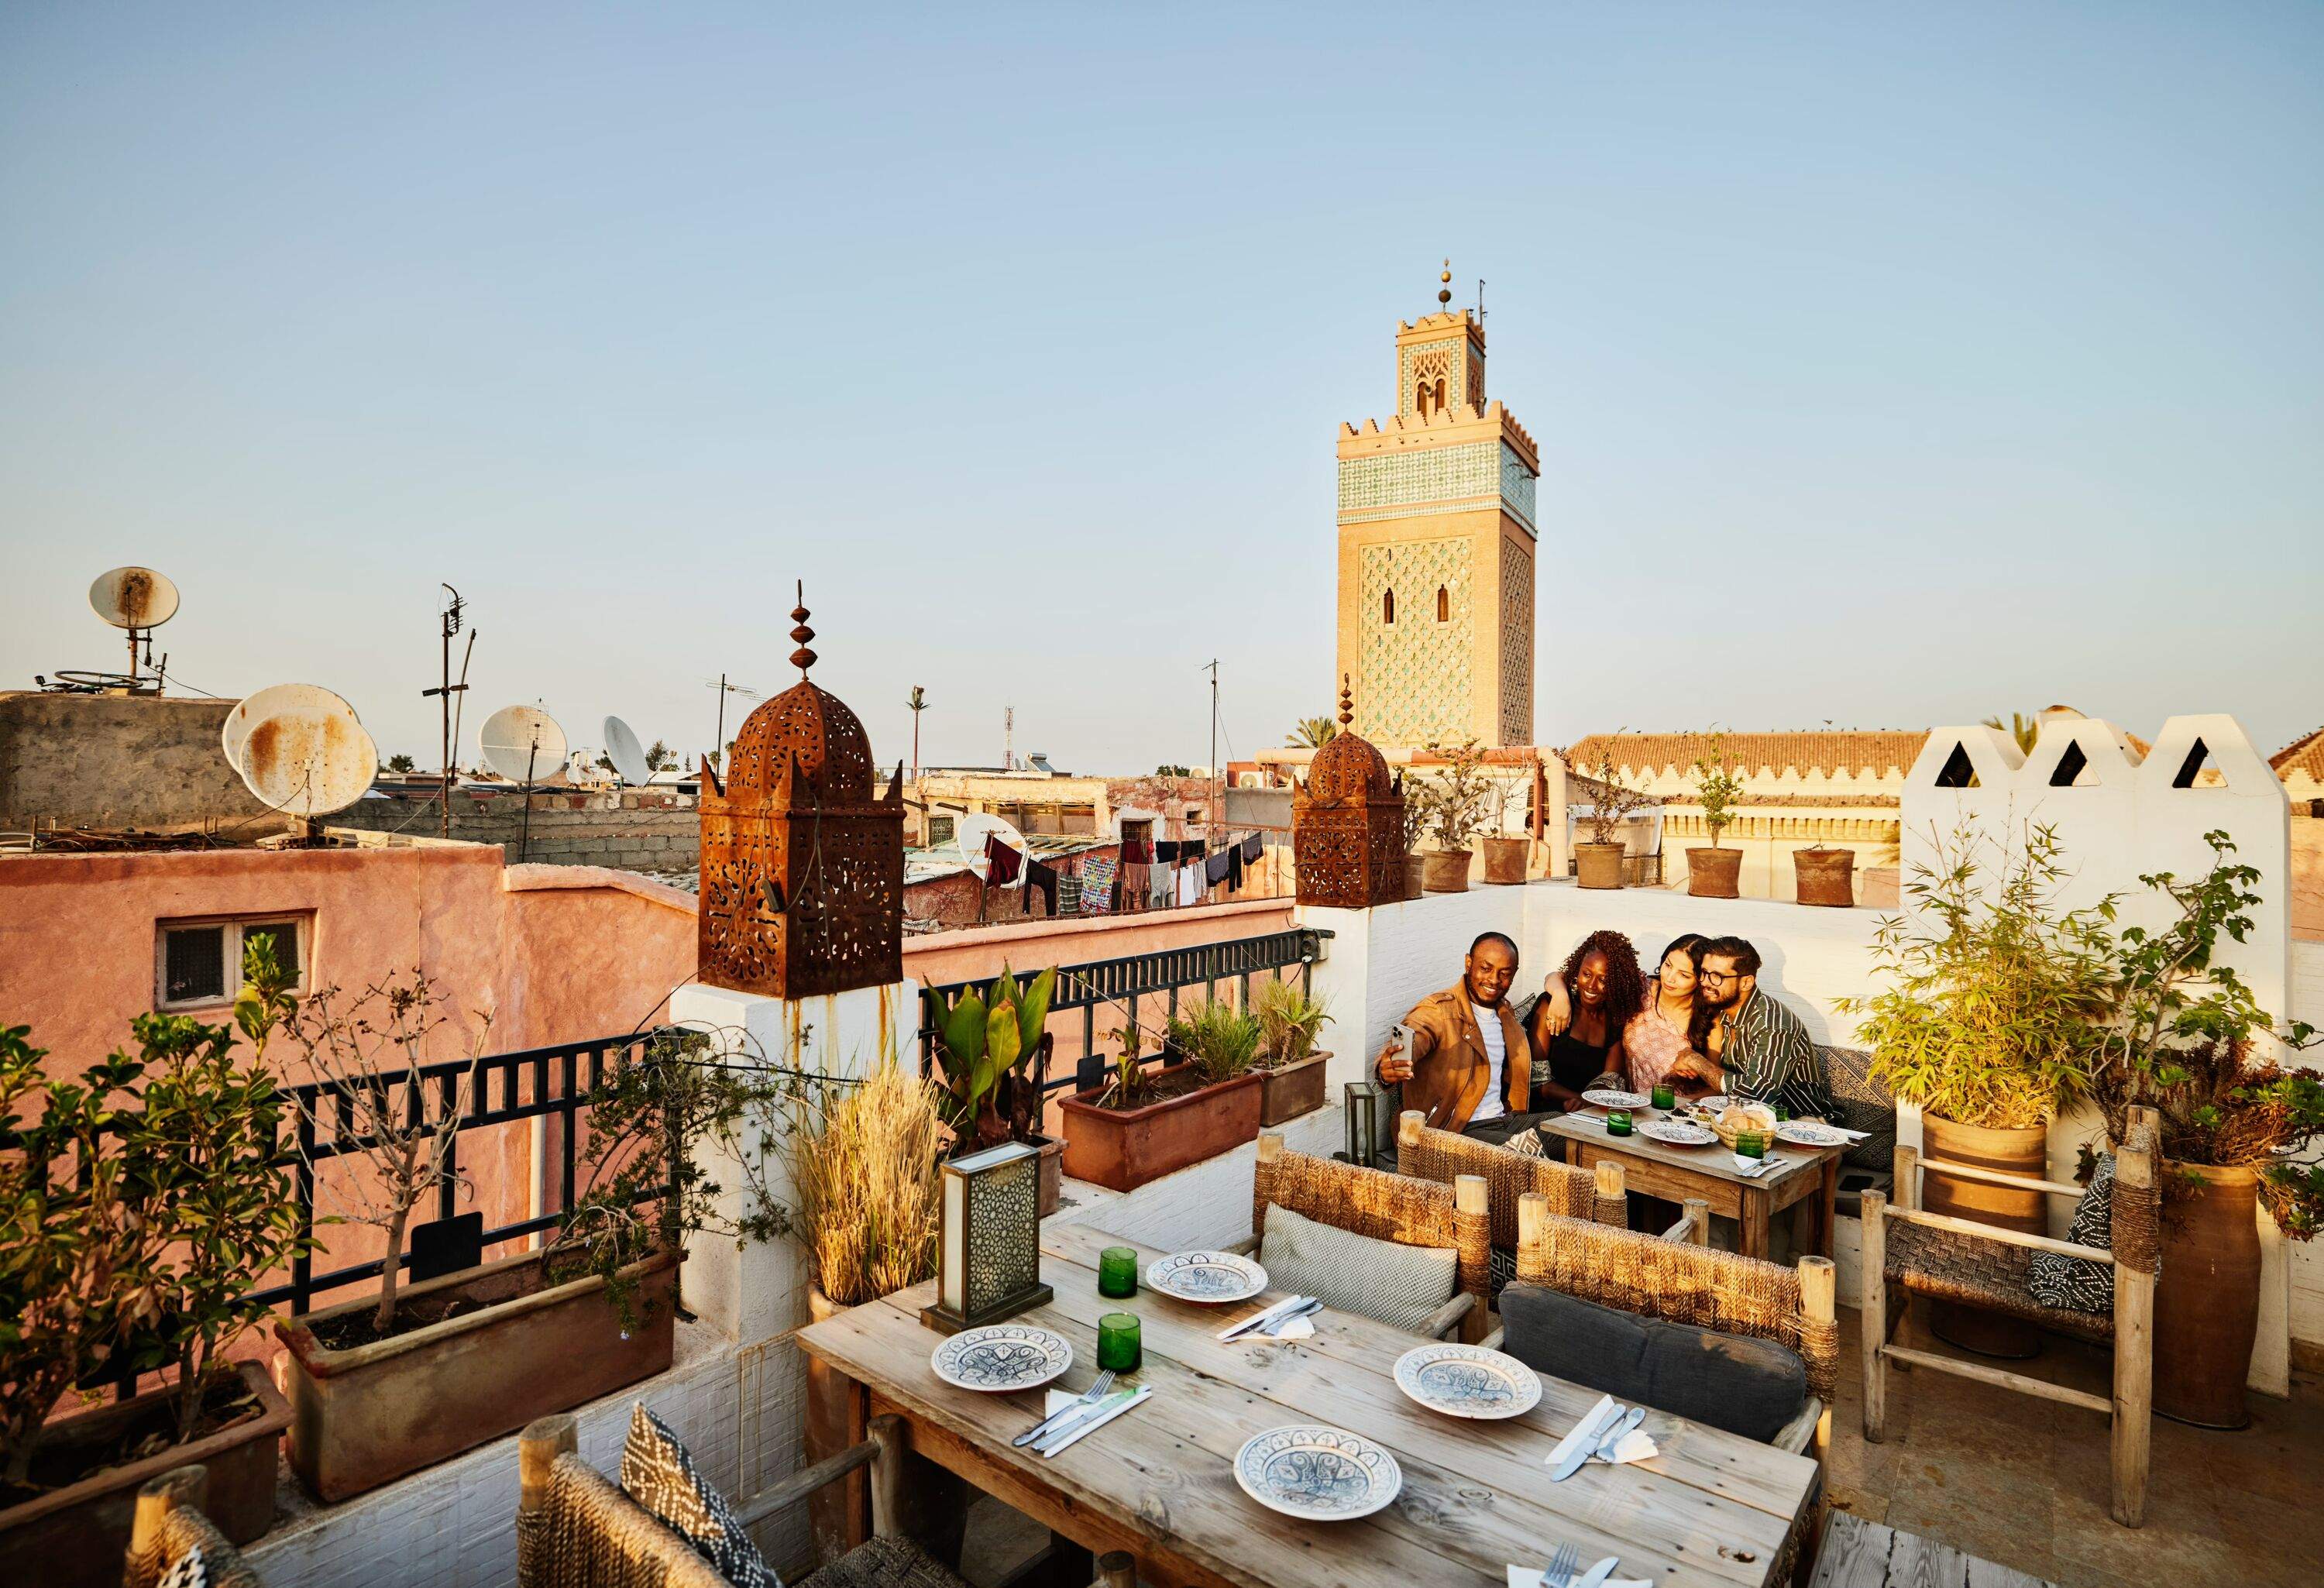 Wide shot of smiling couple taking selfie while dining with friends at rooftop restaurant in the Medina of Marrakech while on vacation